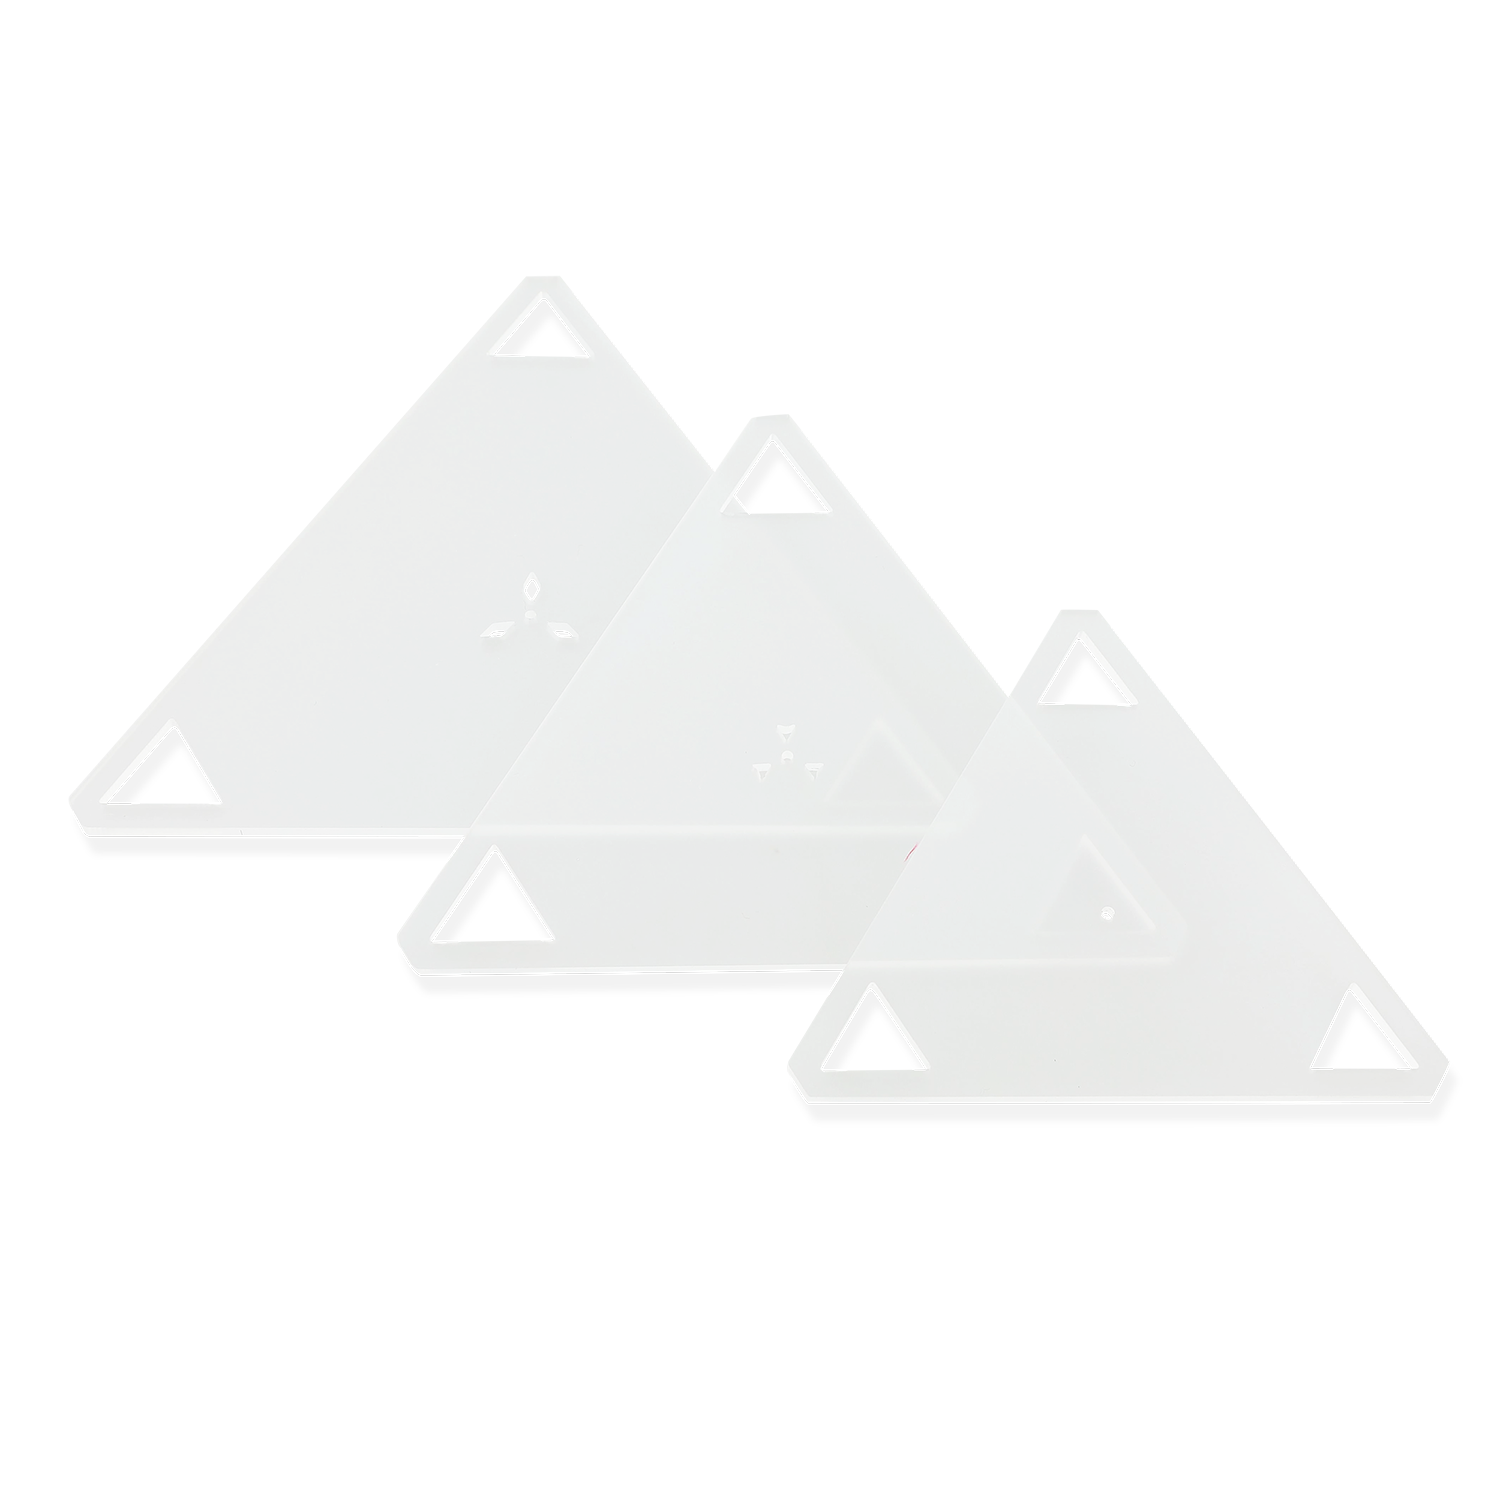 Set of large 60 degree triangle quilt templates: 4 1/2", 5 1/2" and 6 1/2".